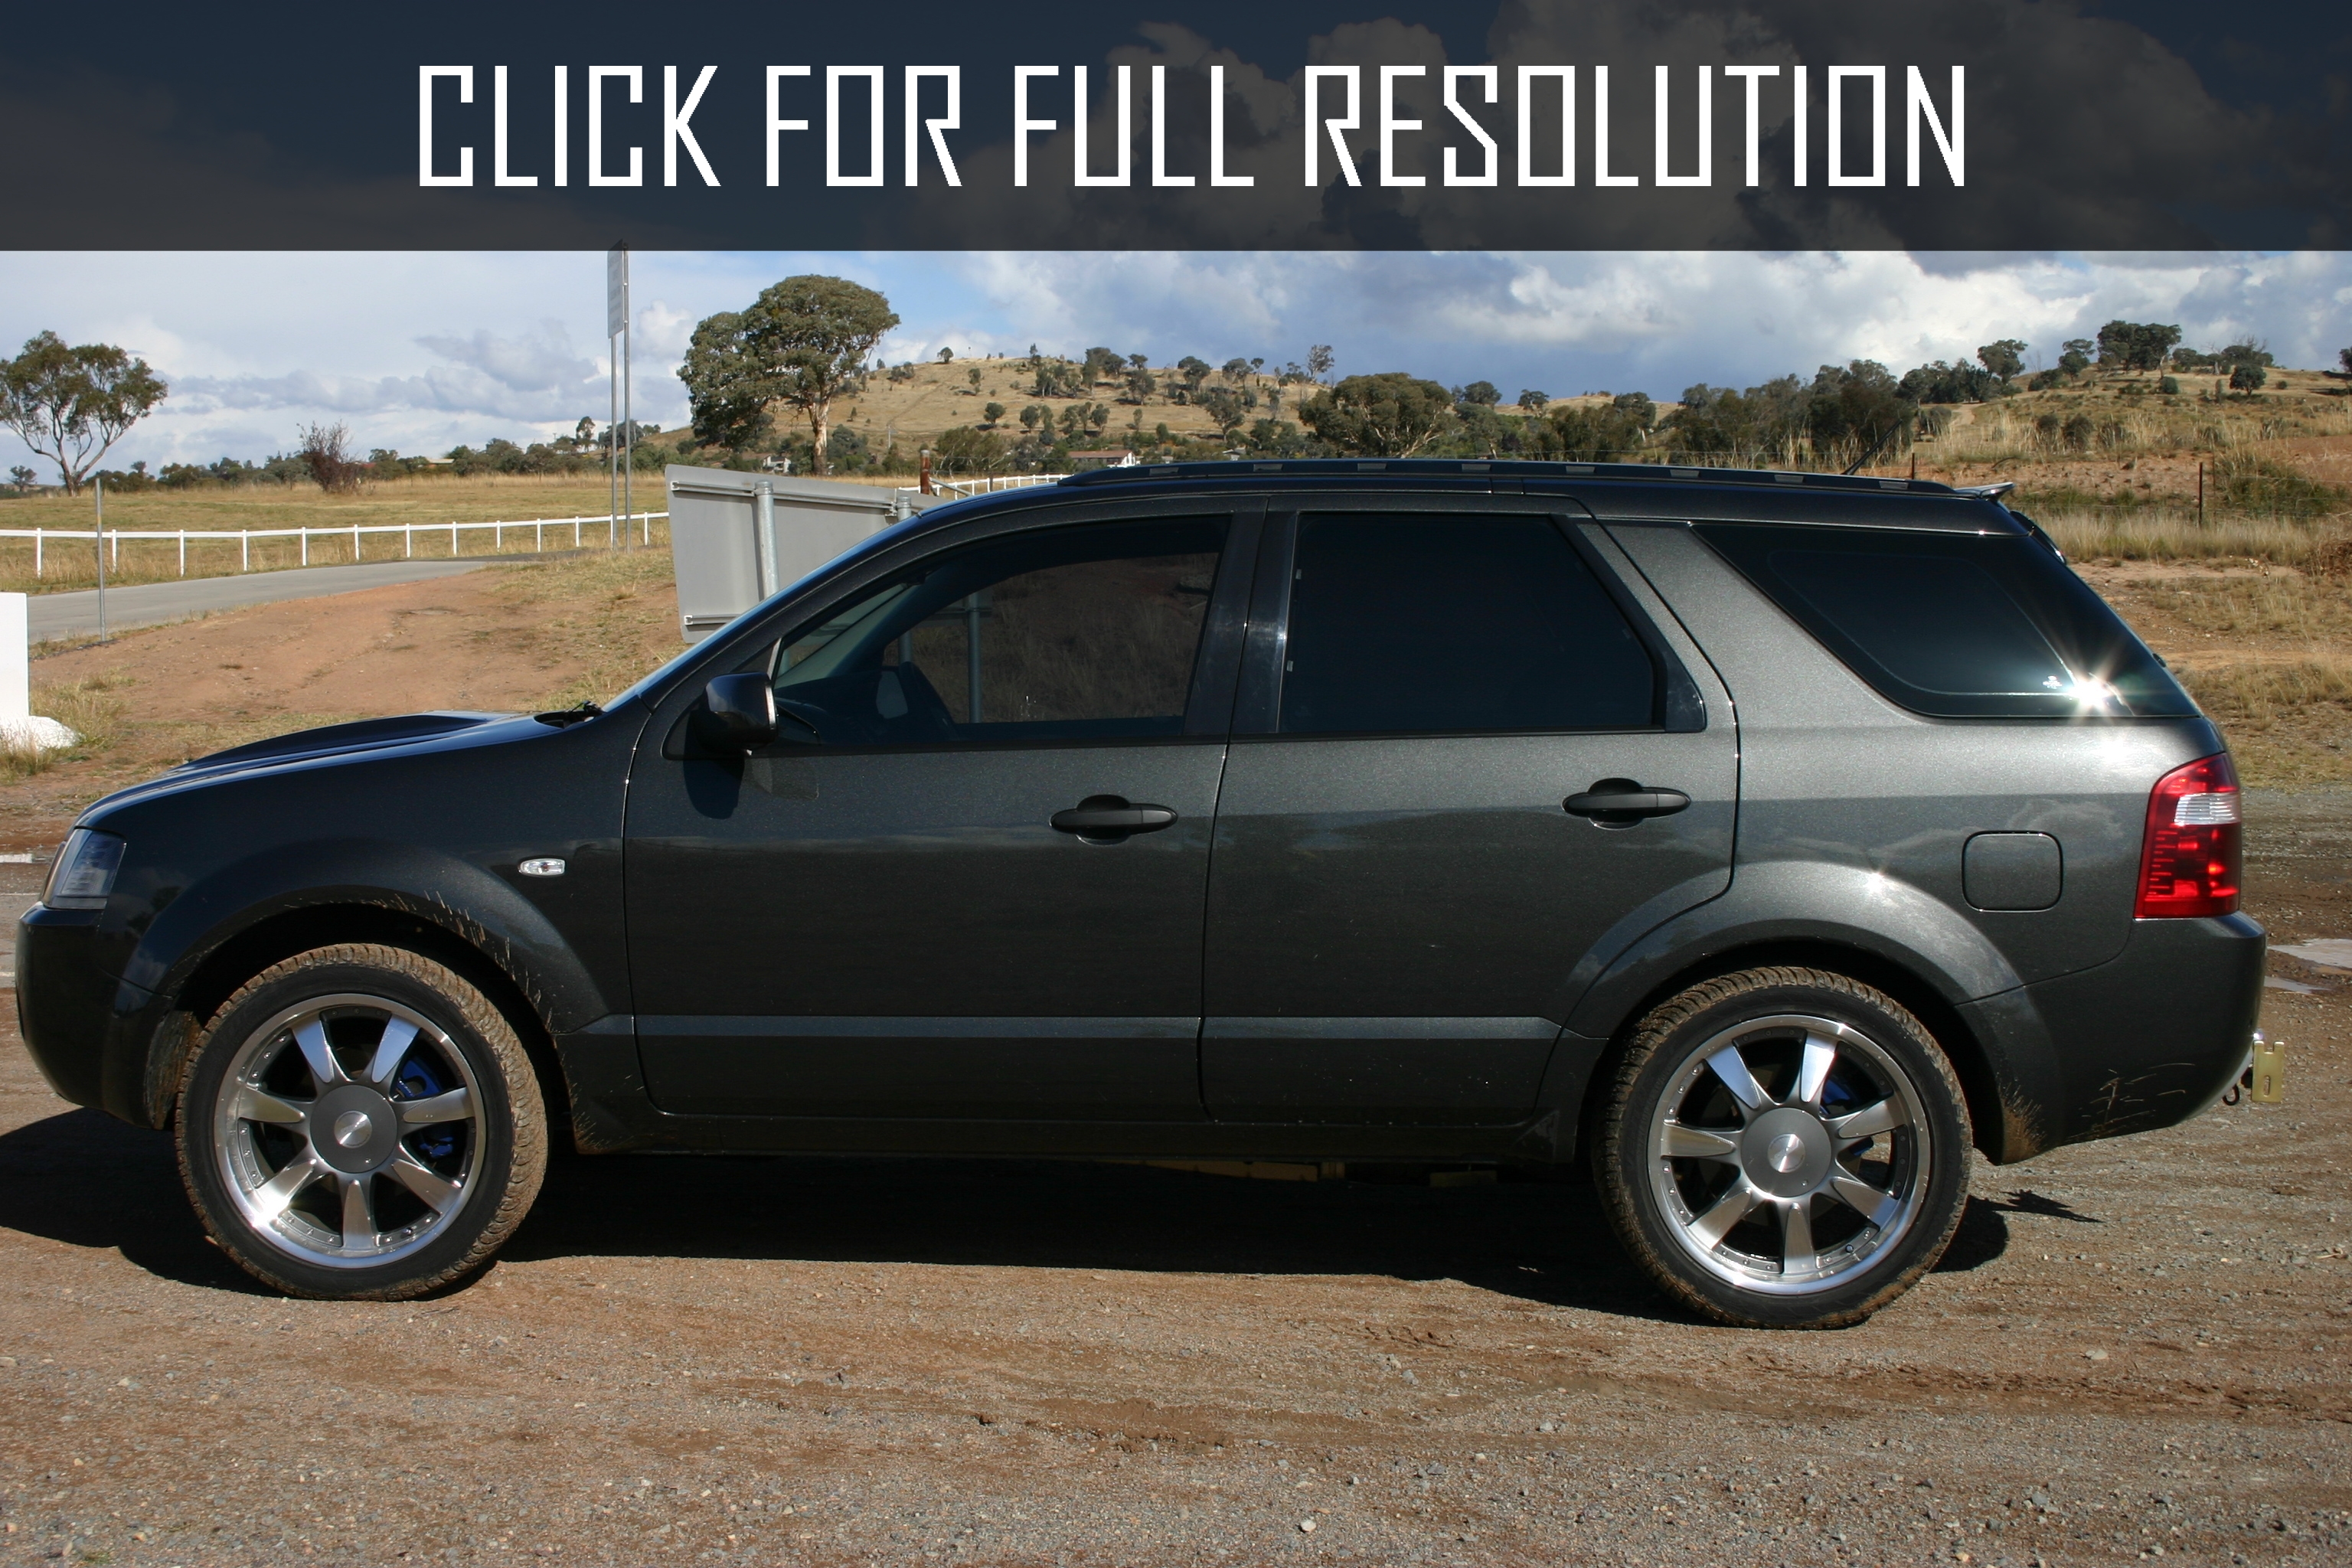 Ford Territory 2007